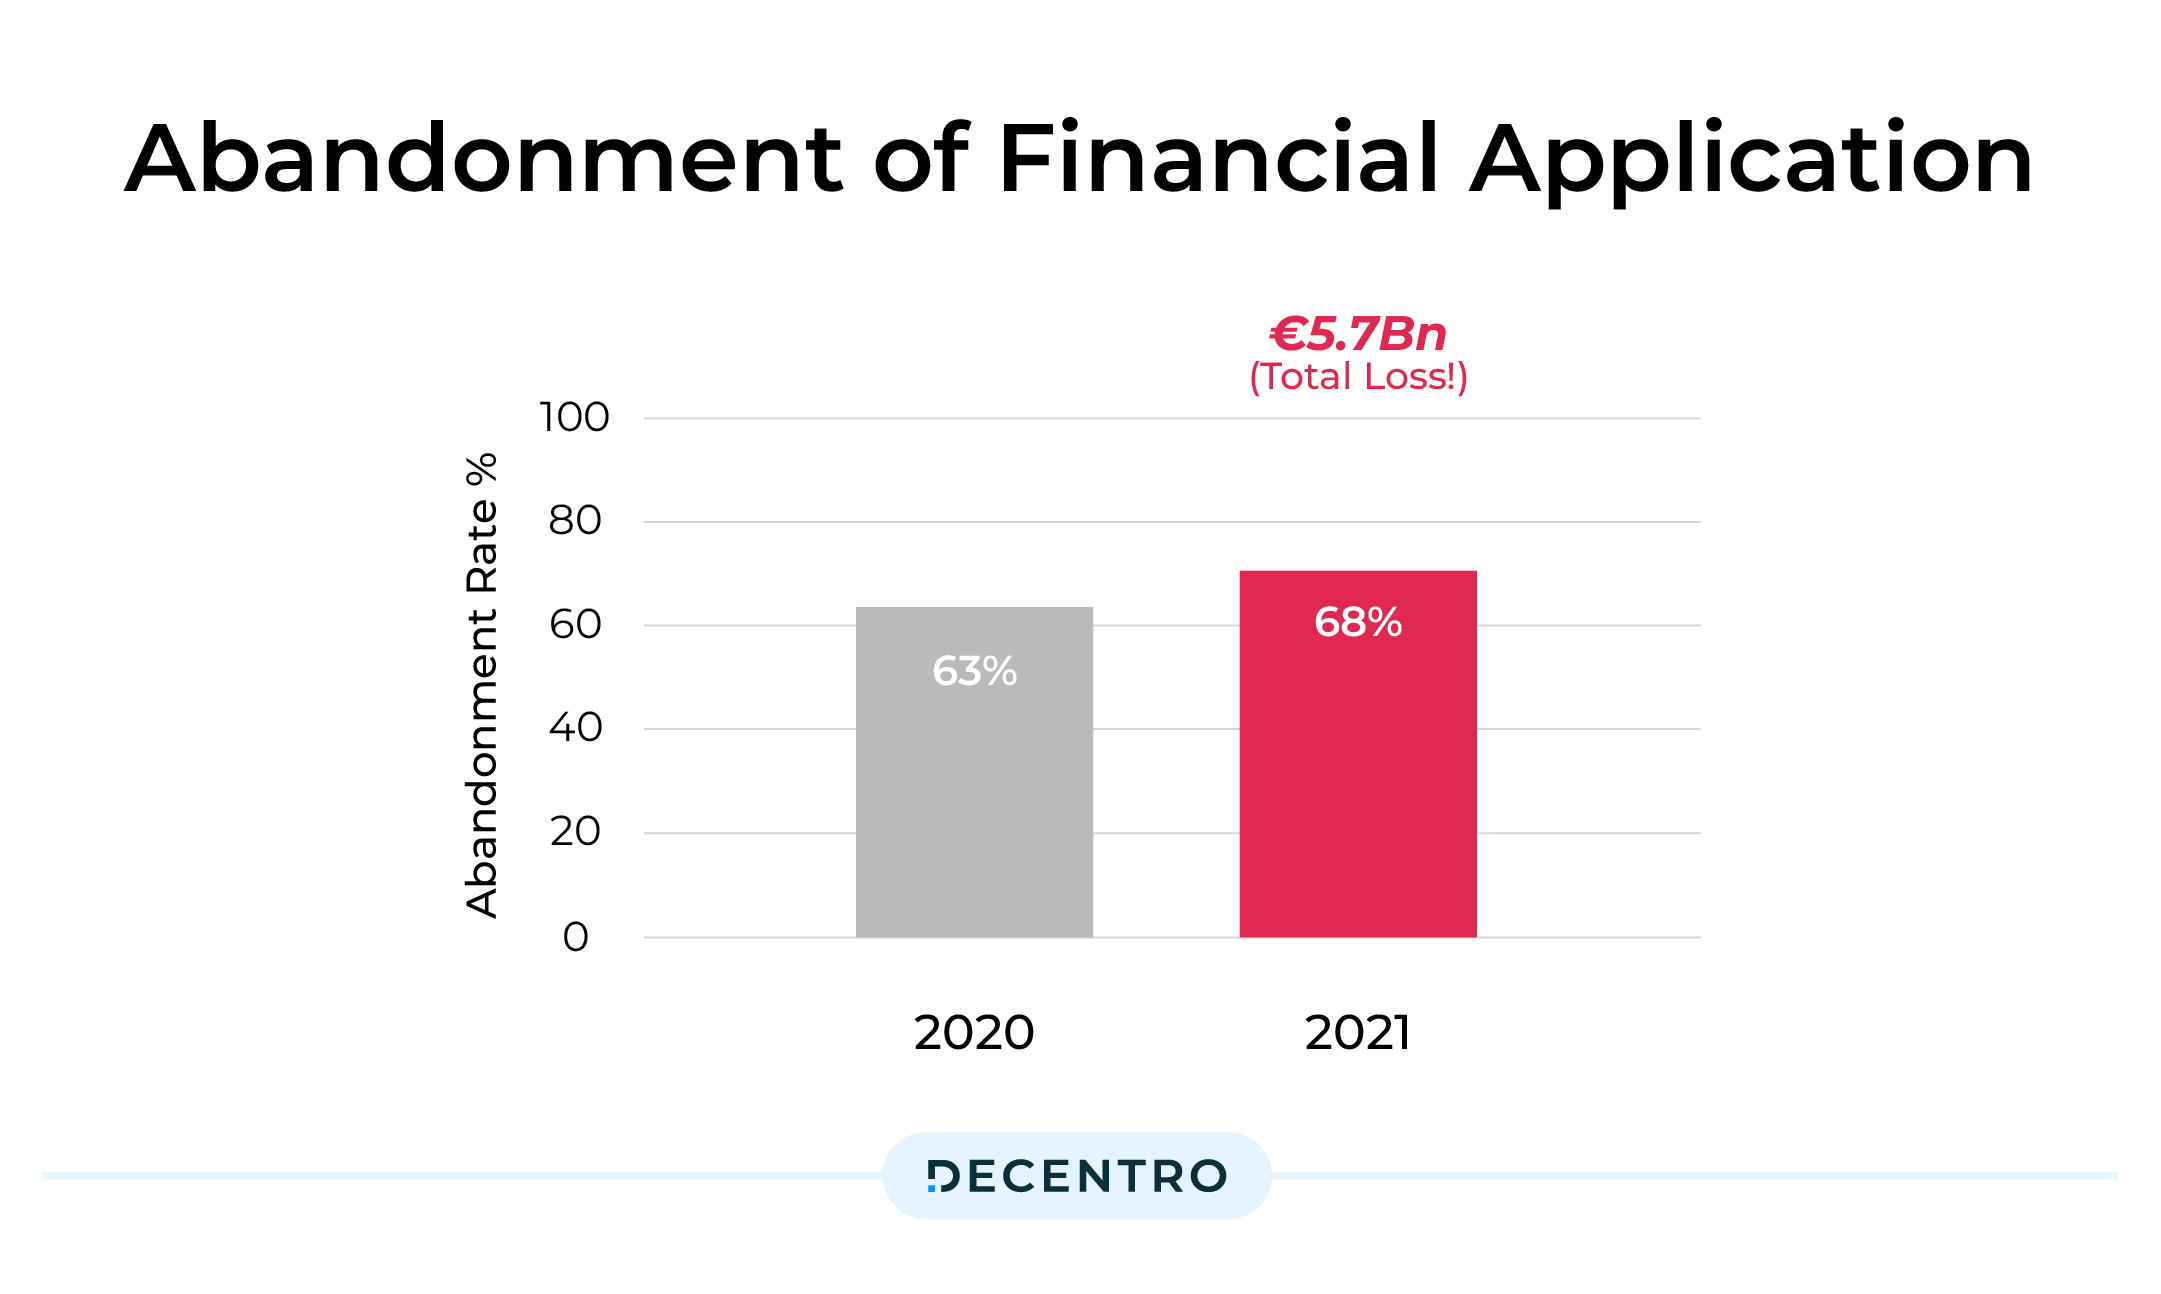 Abandonment rate of Financial Applications